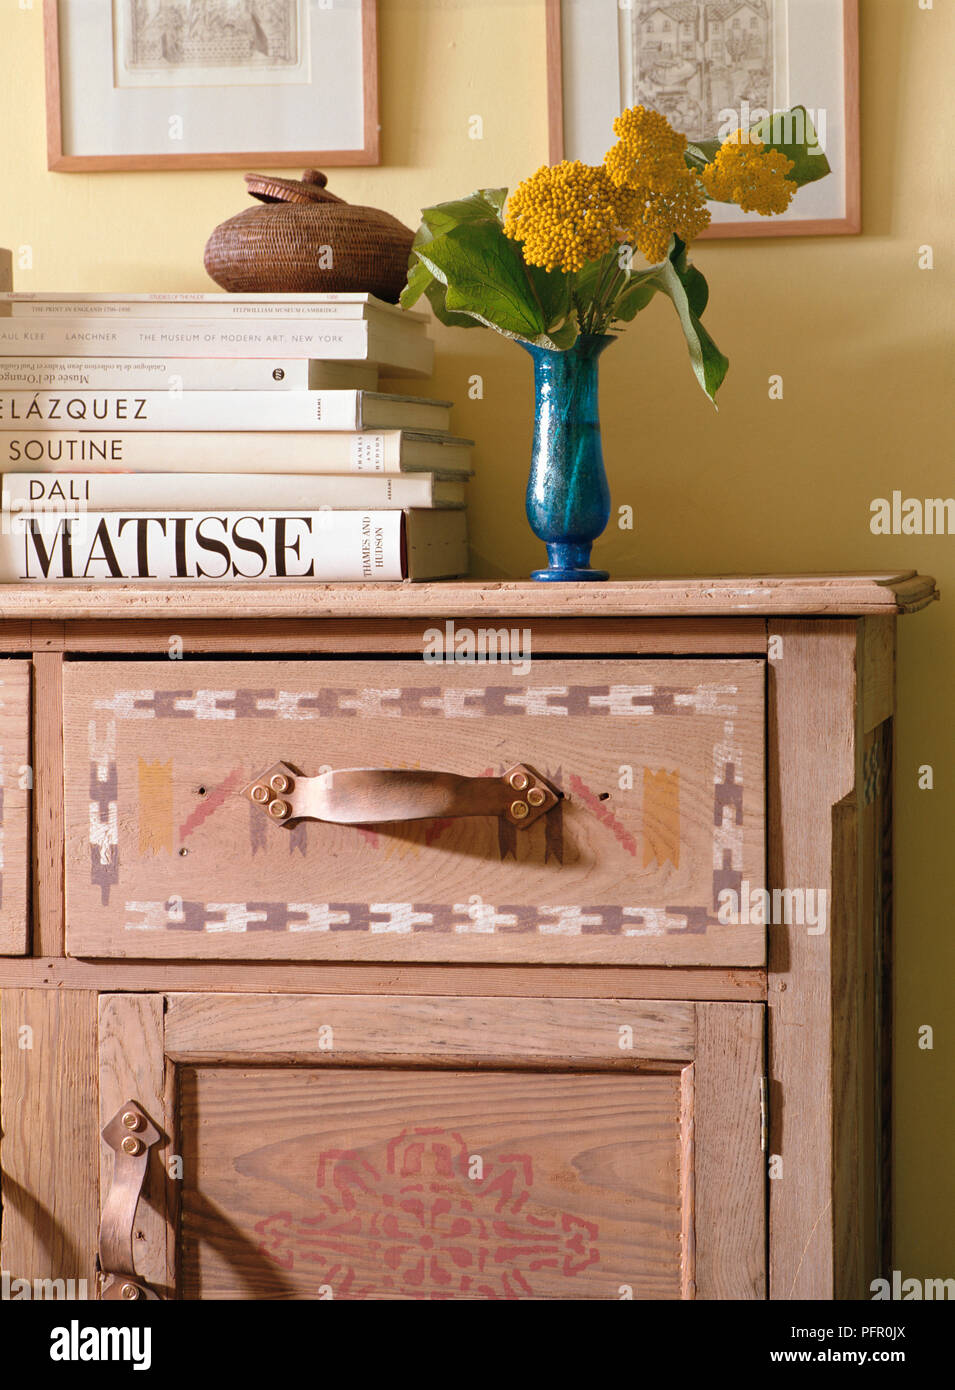 Wooden dresser with cupboard and drawers, stacked books on top, blue vase of yellow flowers, framed pictures on yellow wall behind. Stock Photo